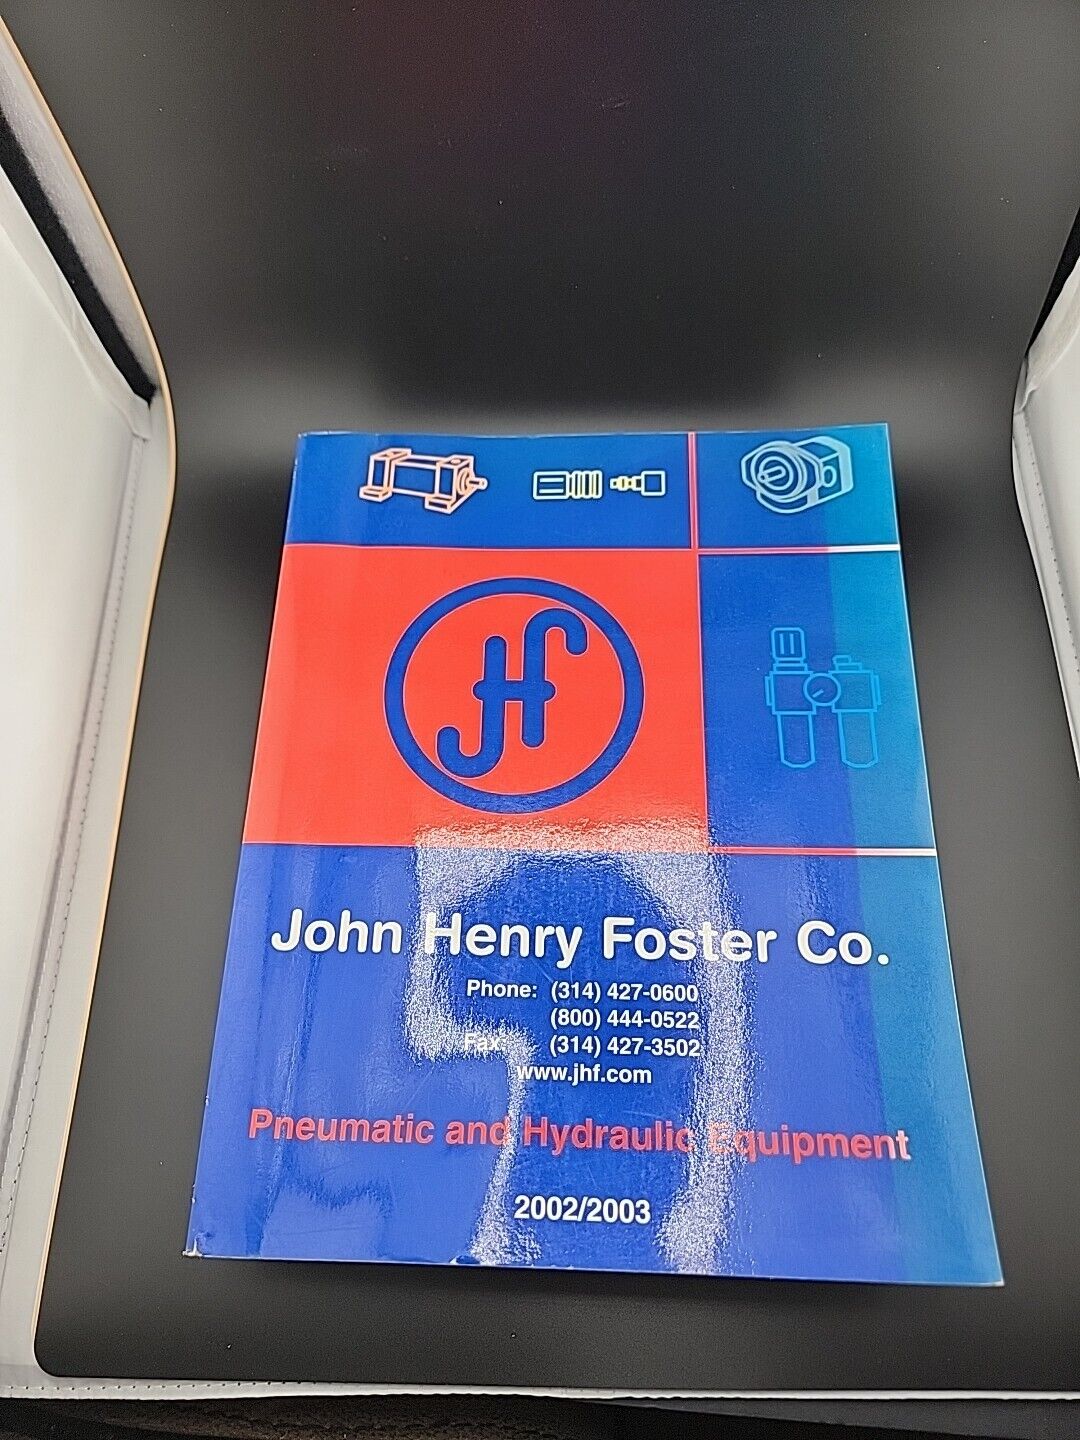 JOHN HENRY FOSTER CO. PNEUMATIC AND HYDRAULIC EQUIPMENT CATALOG 2002/2003